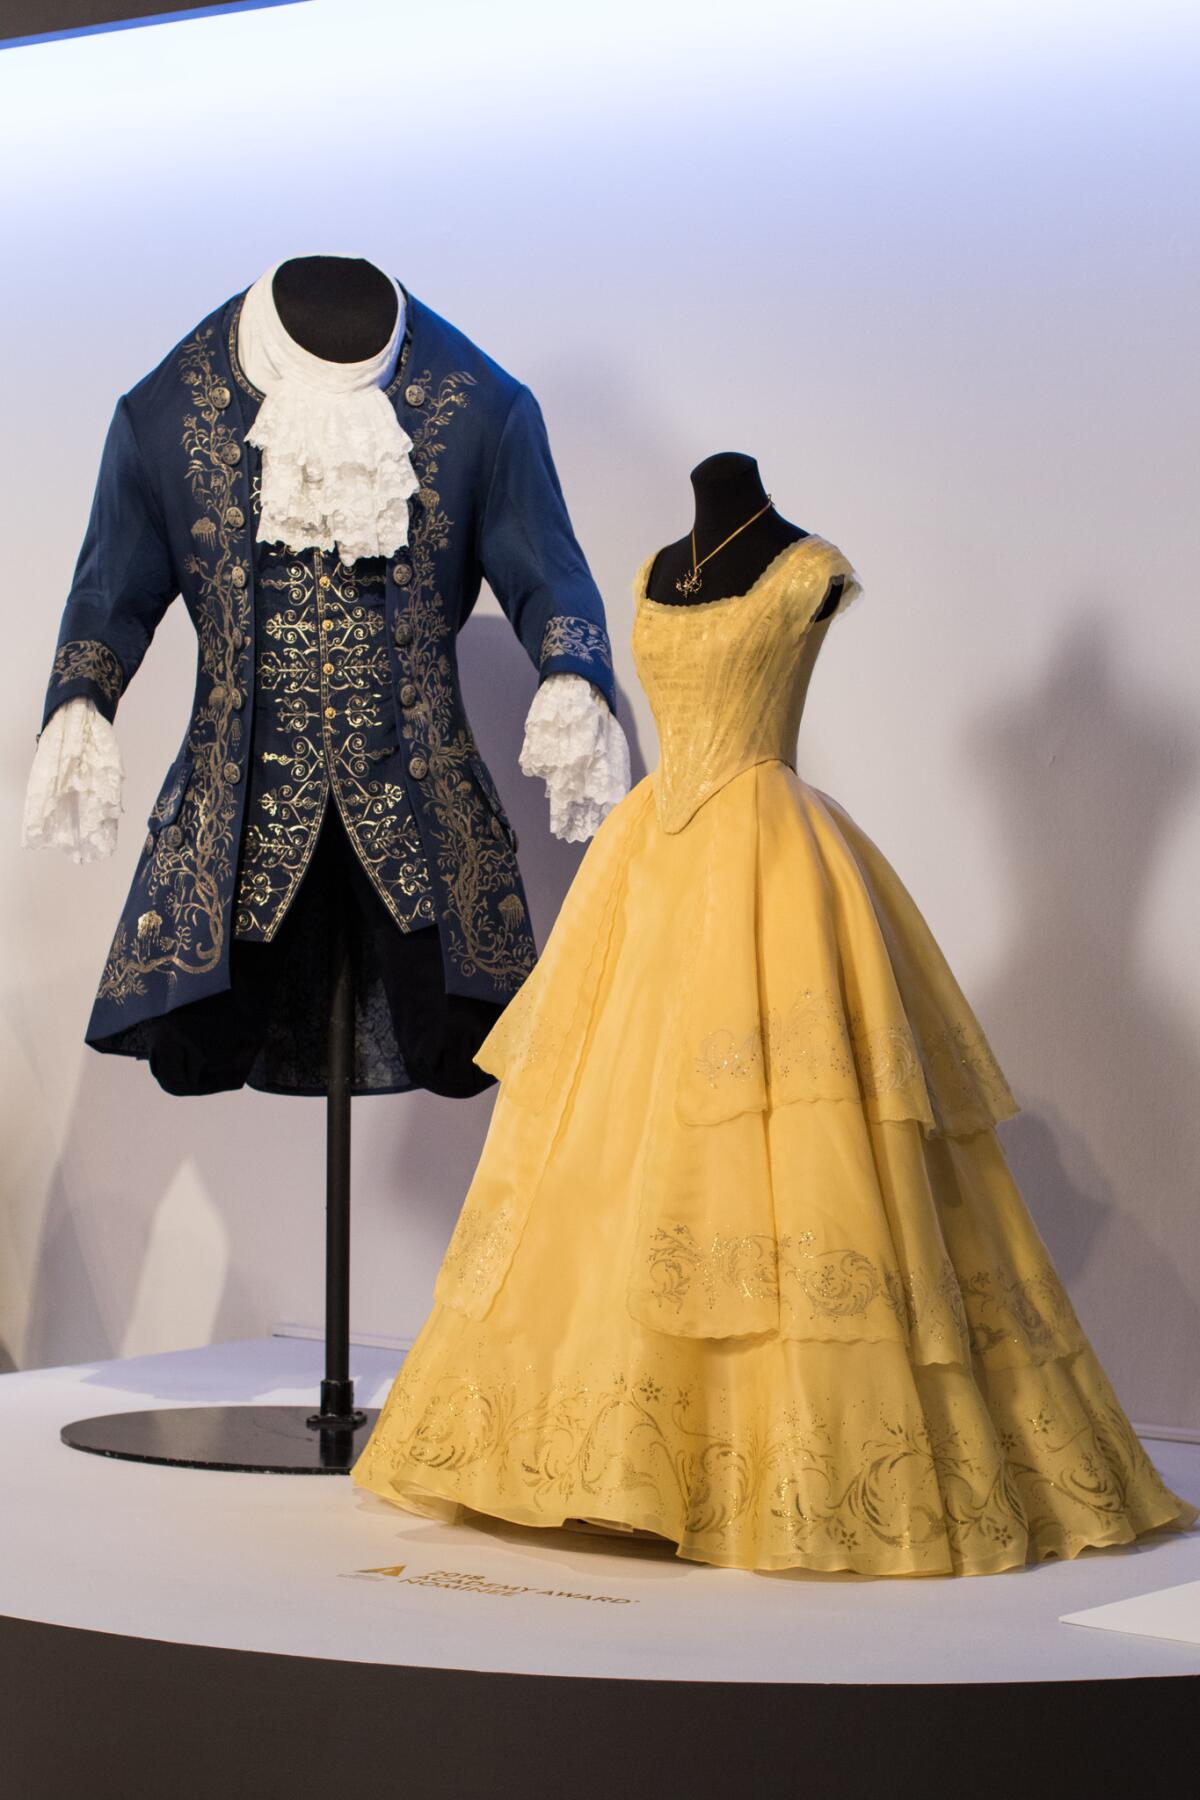 "Beauty and the Beast" costumes by Jacqueline Durran, a double Academy Award nominee for costume design. In addition to "Beauty and the Beast," she's also nominated in the same category for her work in "Darkest Hour."